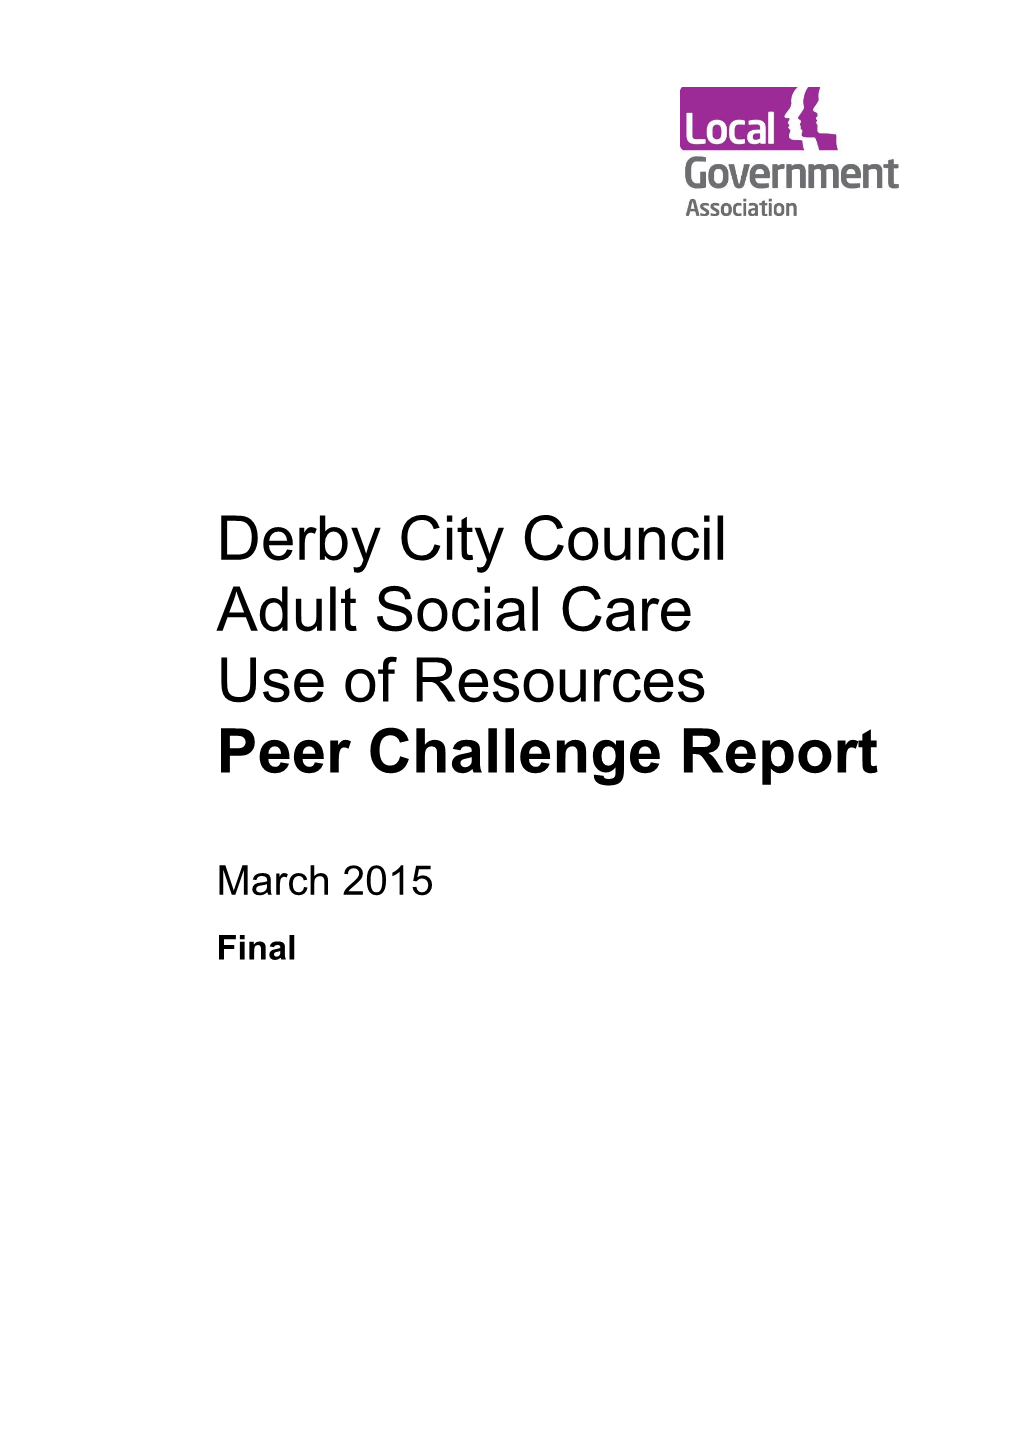 Derby City Council Adult Social Care Use of Resources Peer Challenge Report